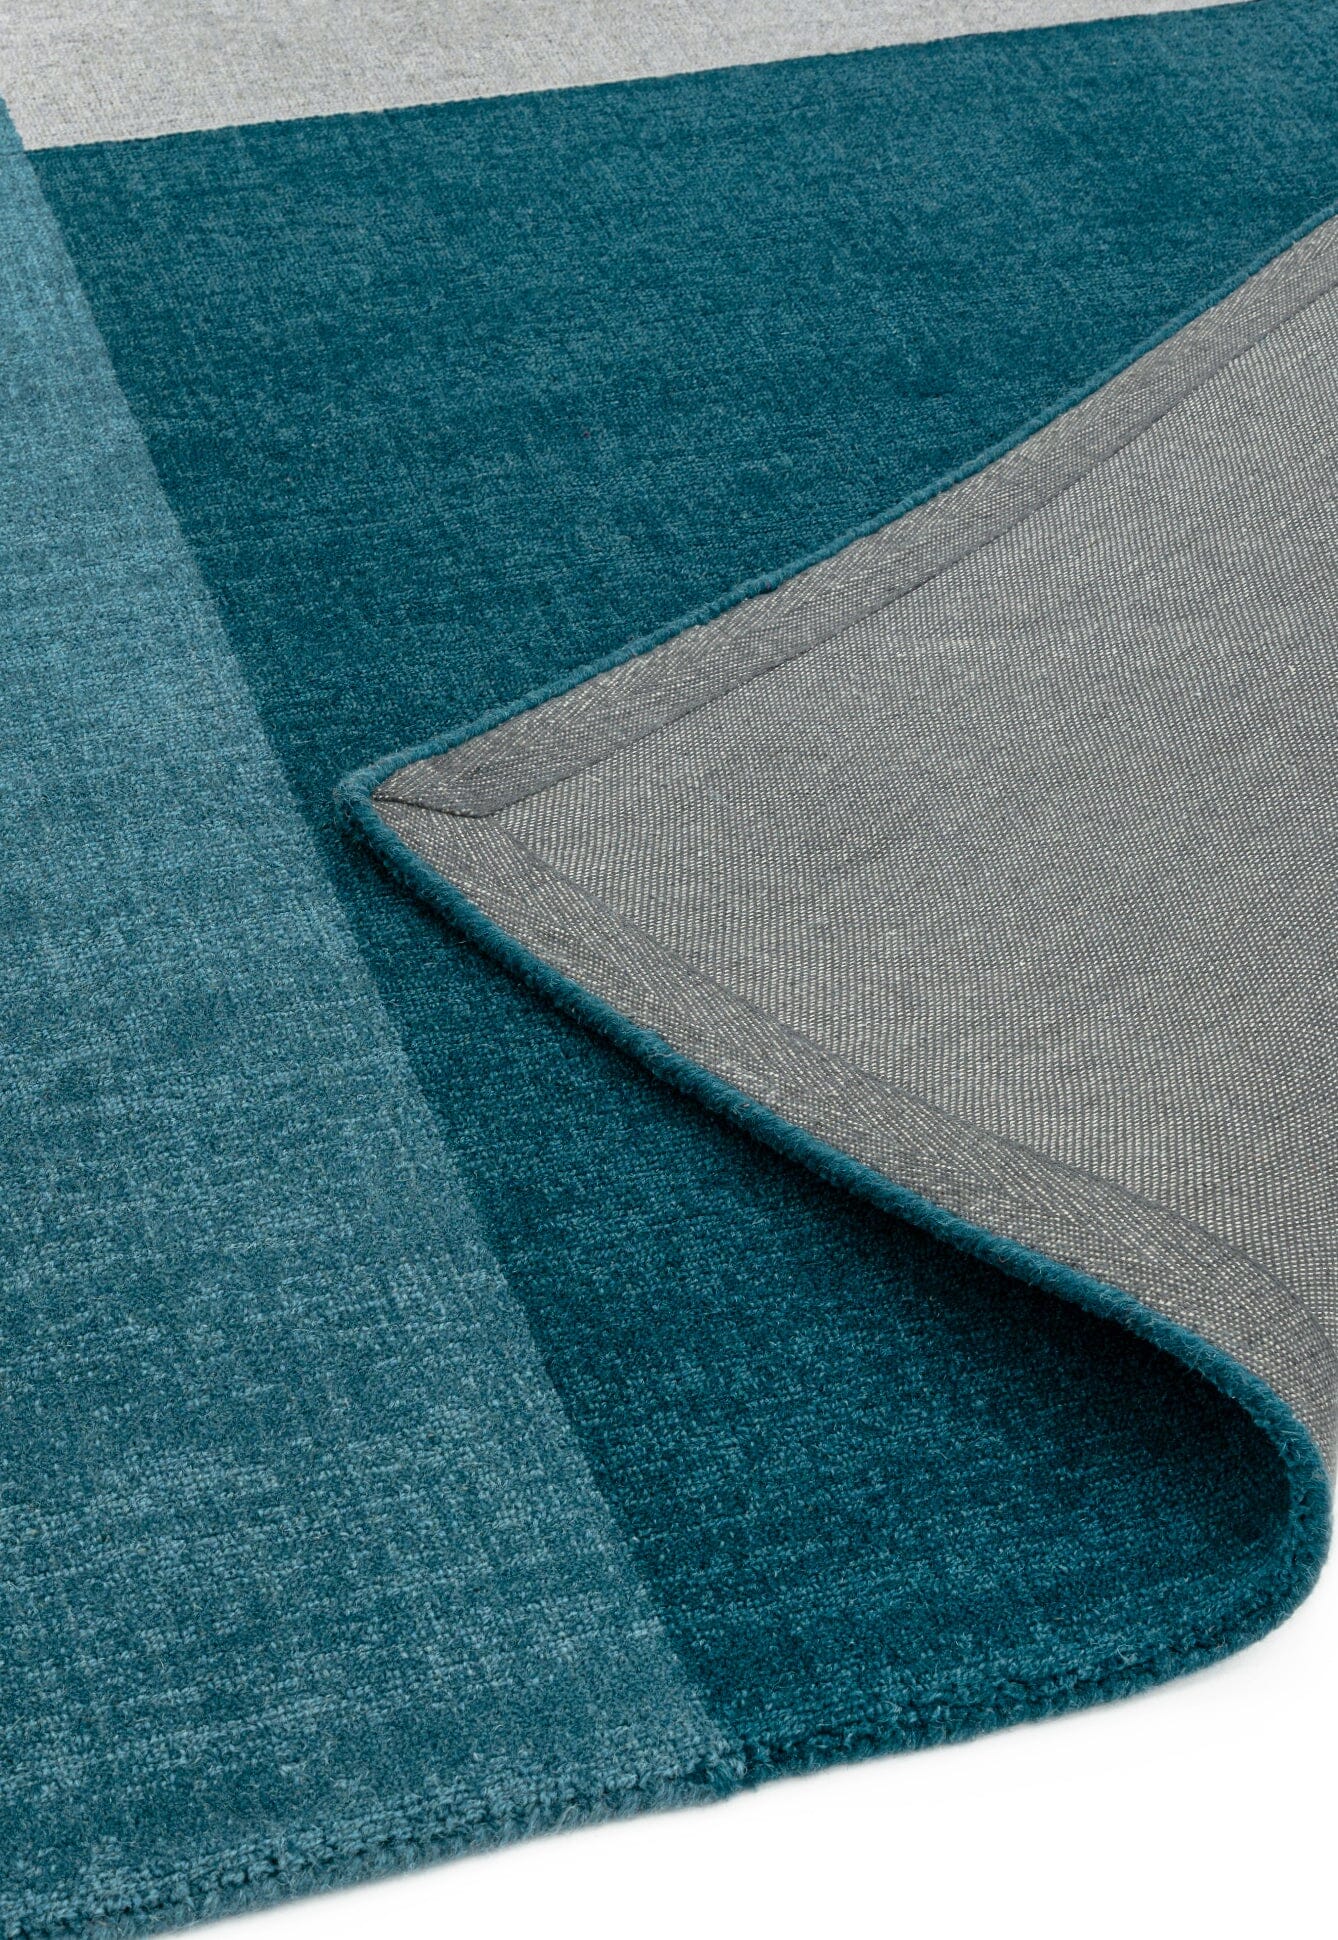 Asiatic Carpets Blox Hand Woven Rug Teal - 120 x 170cm